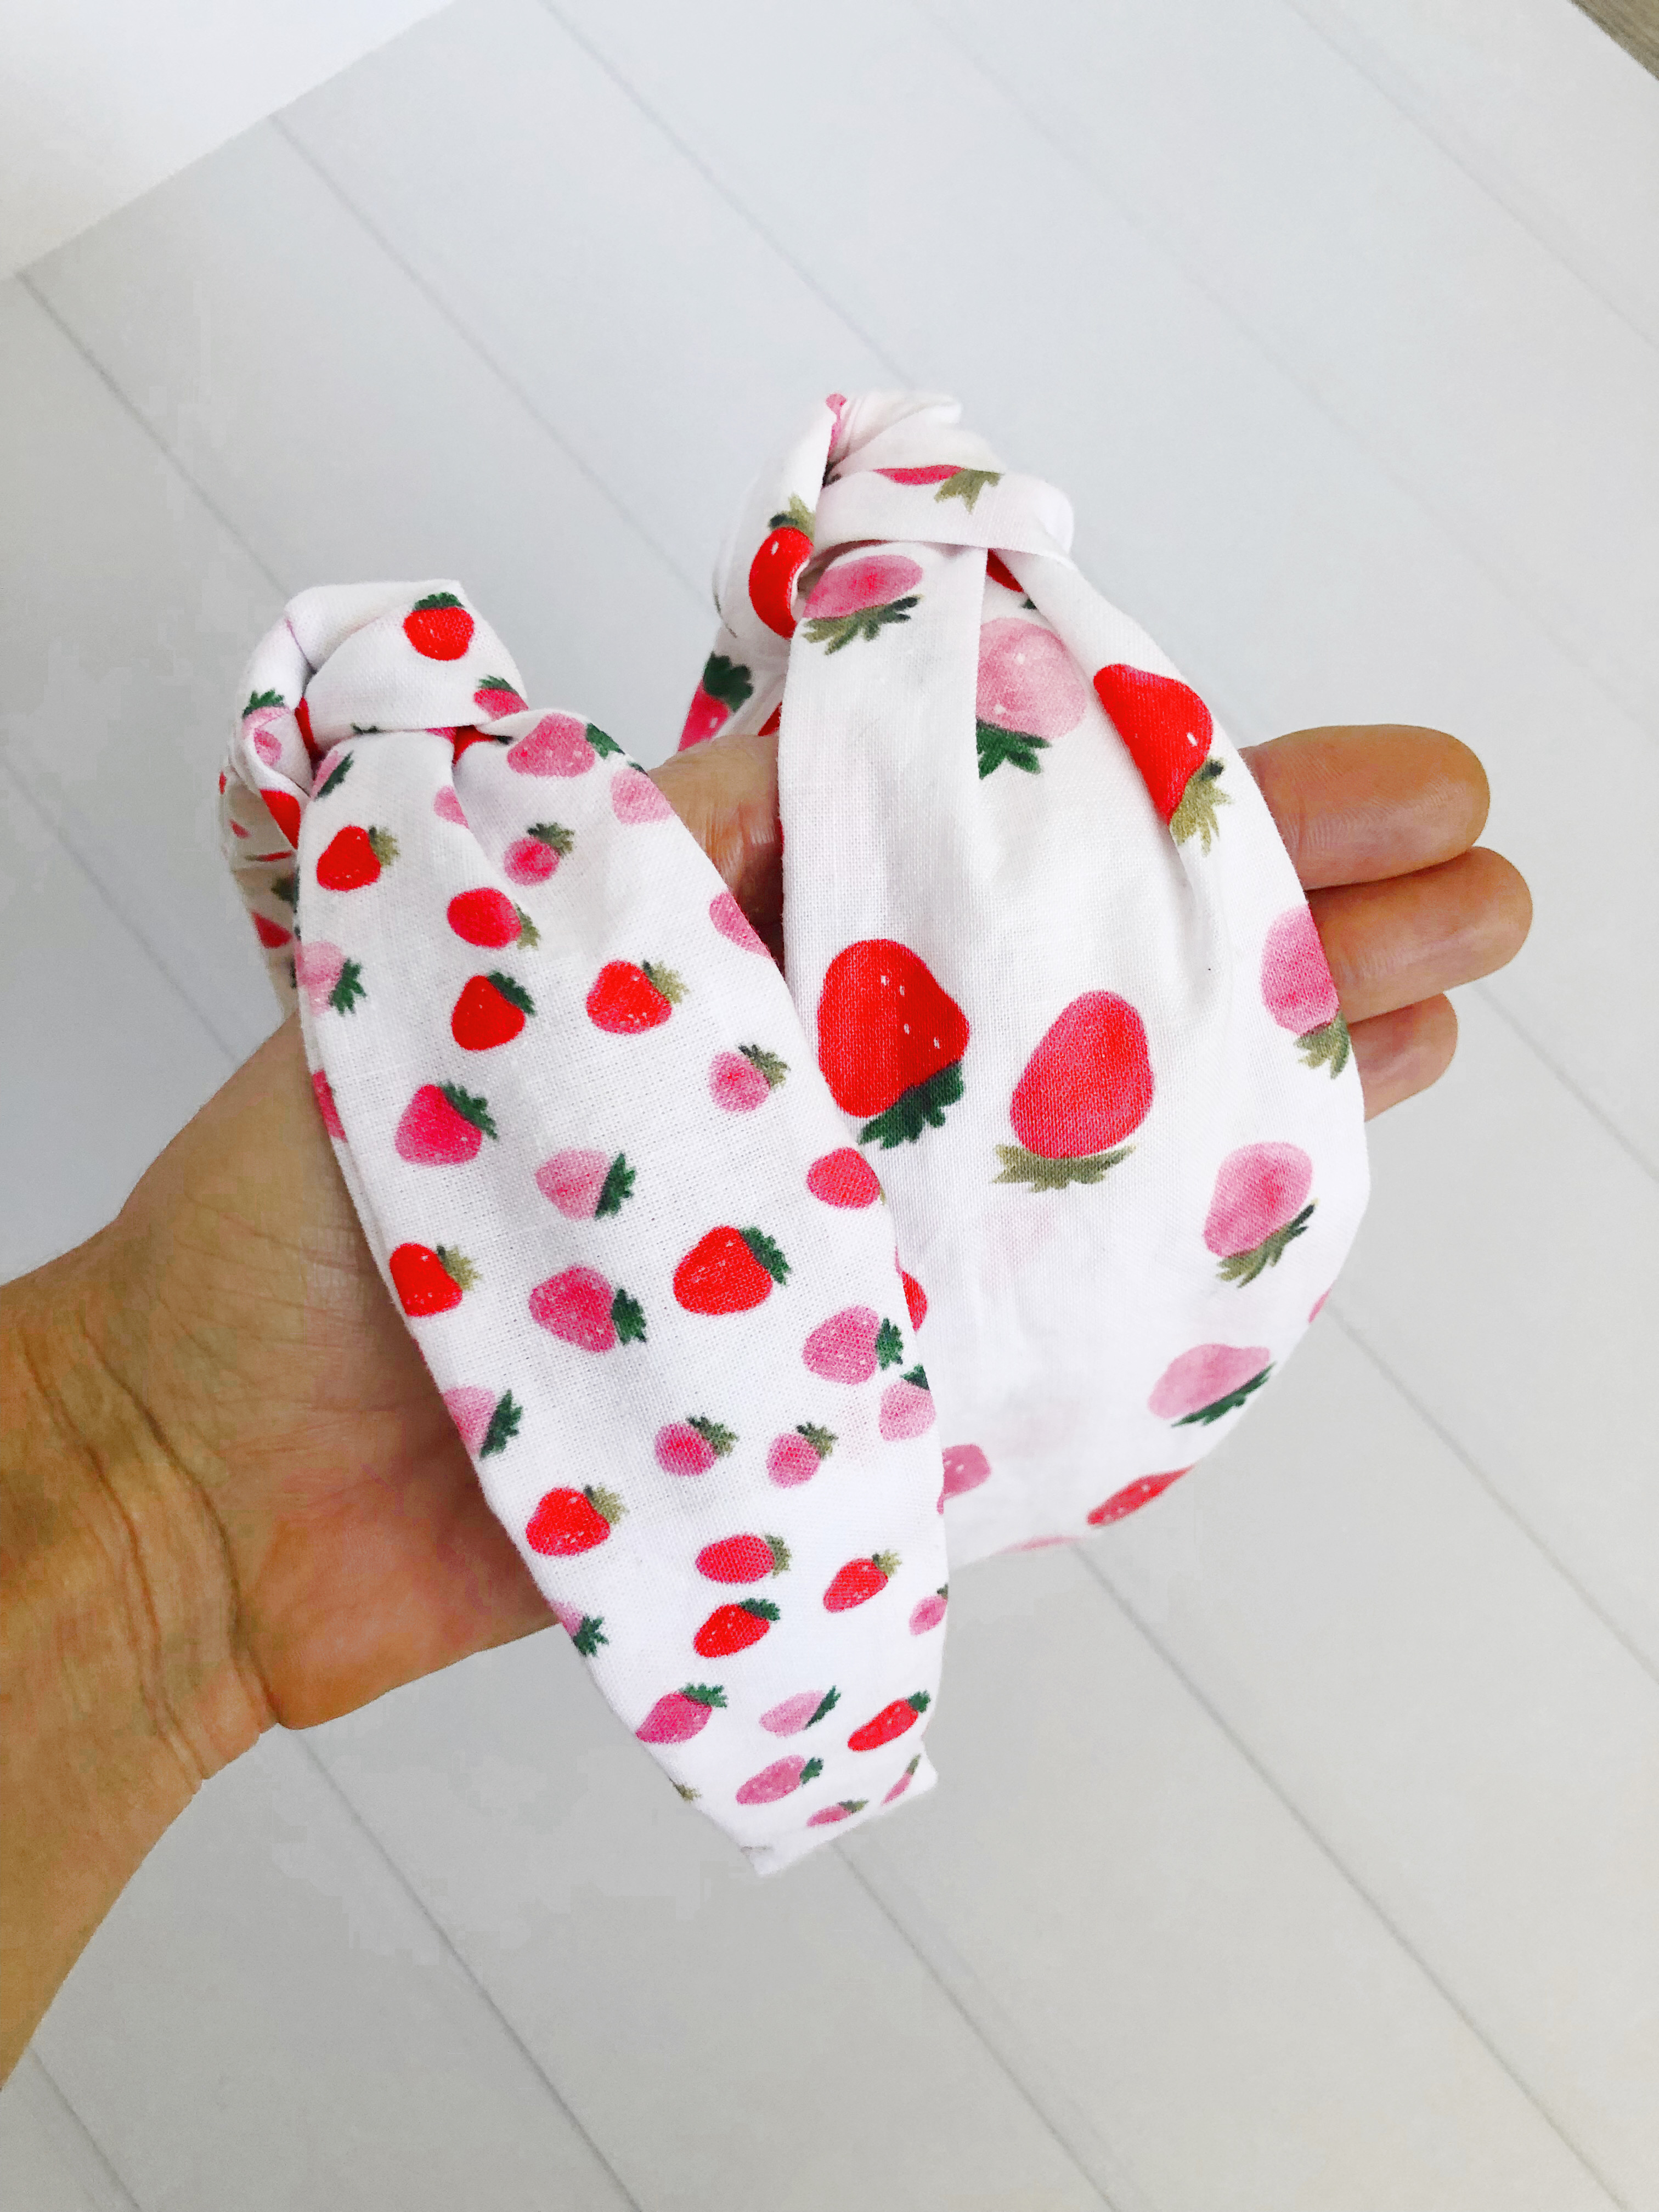 headbands with cherry and strawberry print